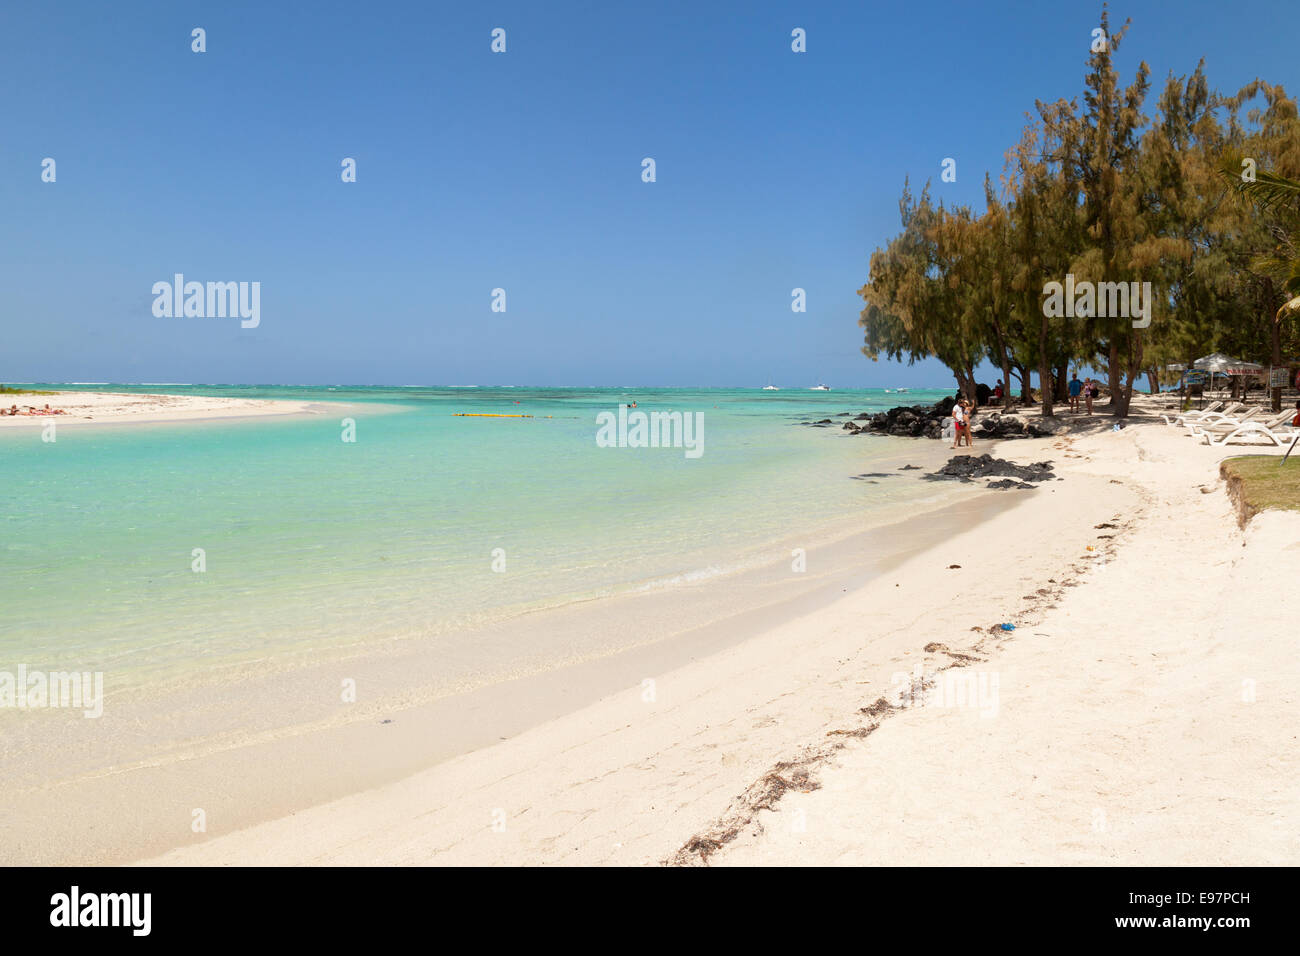 A beach on Ile aux cerfs, a small island just off the east coast of Mauritius, Indian Ocean Stock Photo